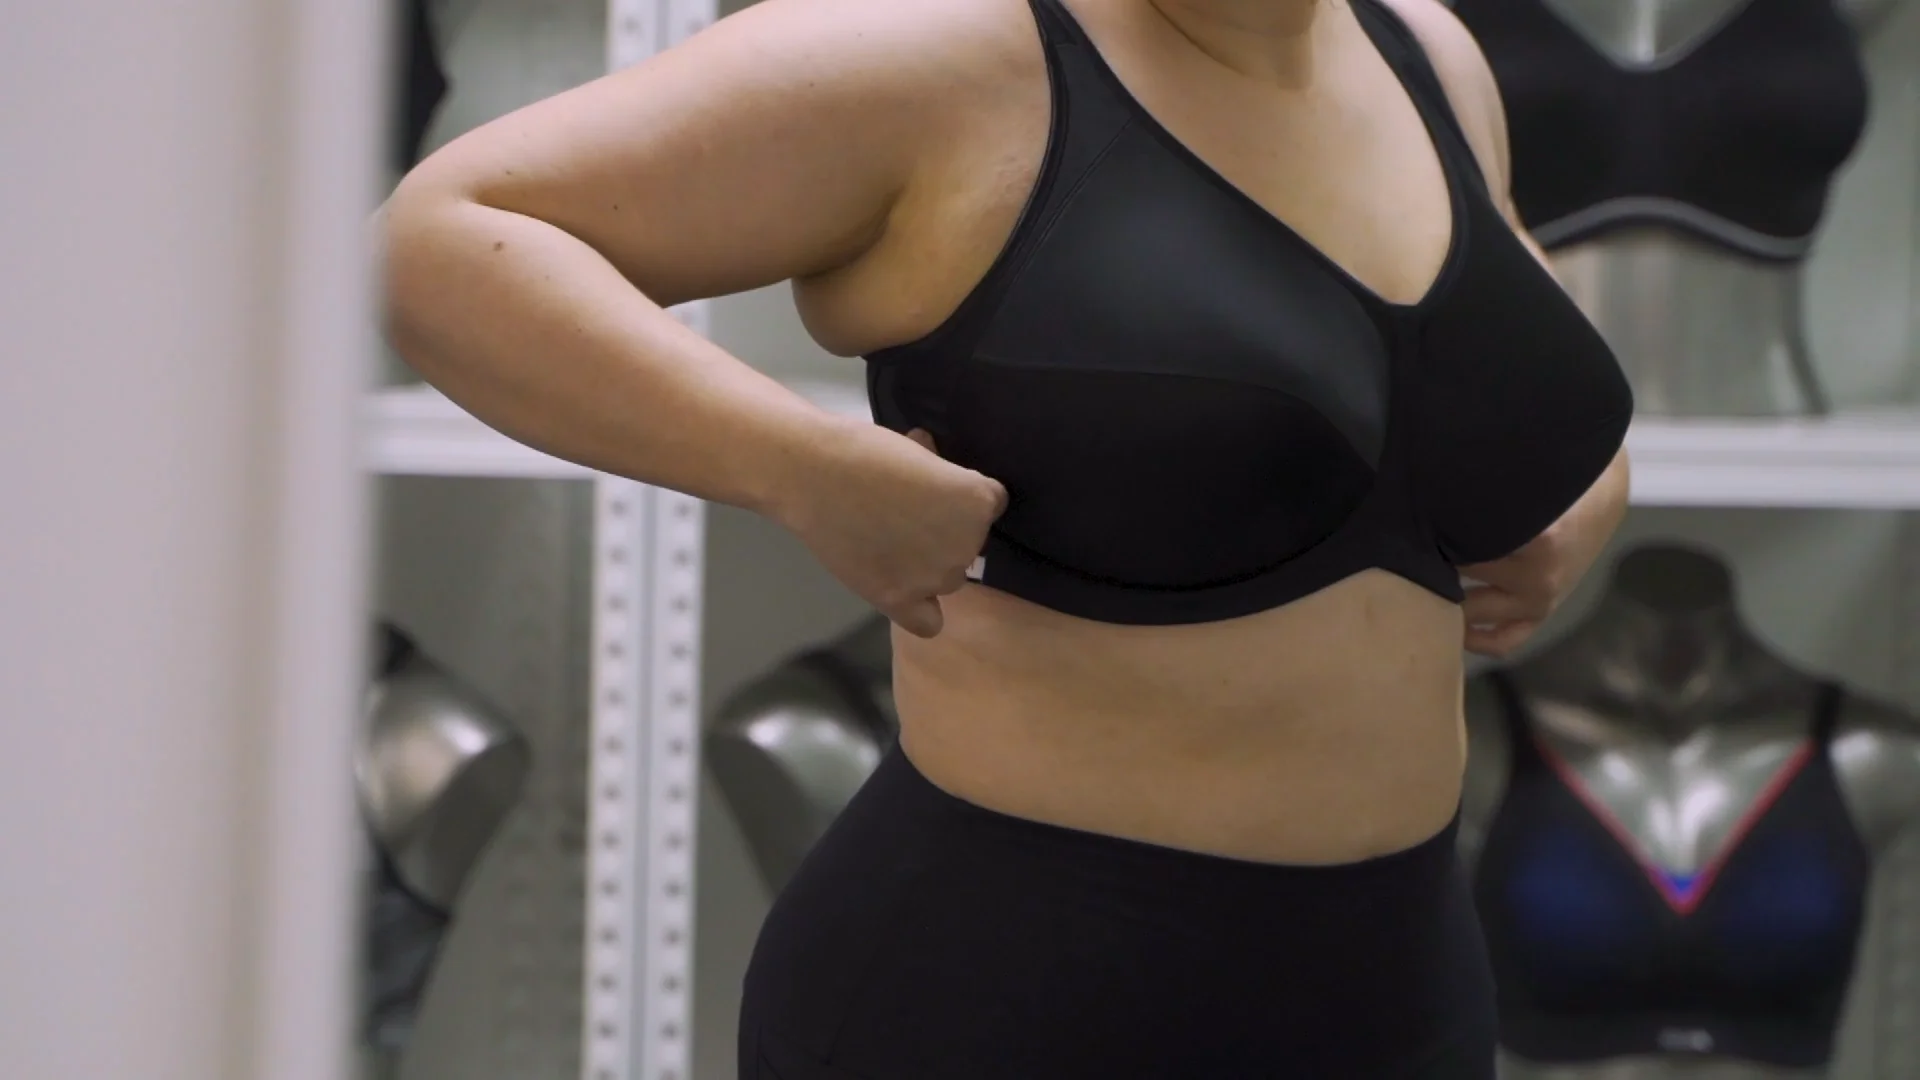 Bra Fit Check for Wearable Pumps.mp4 on Vimeo